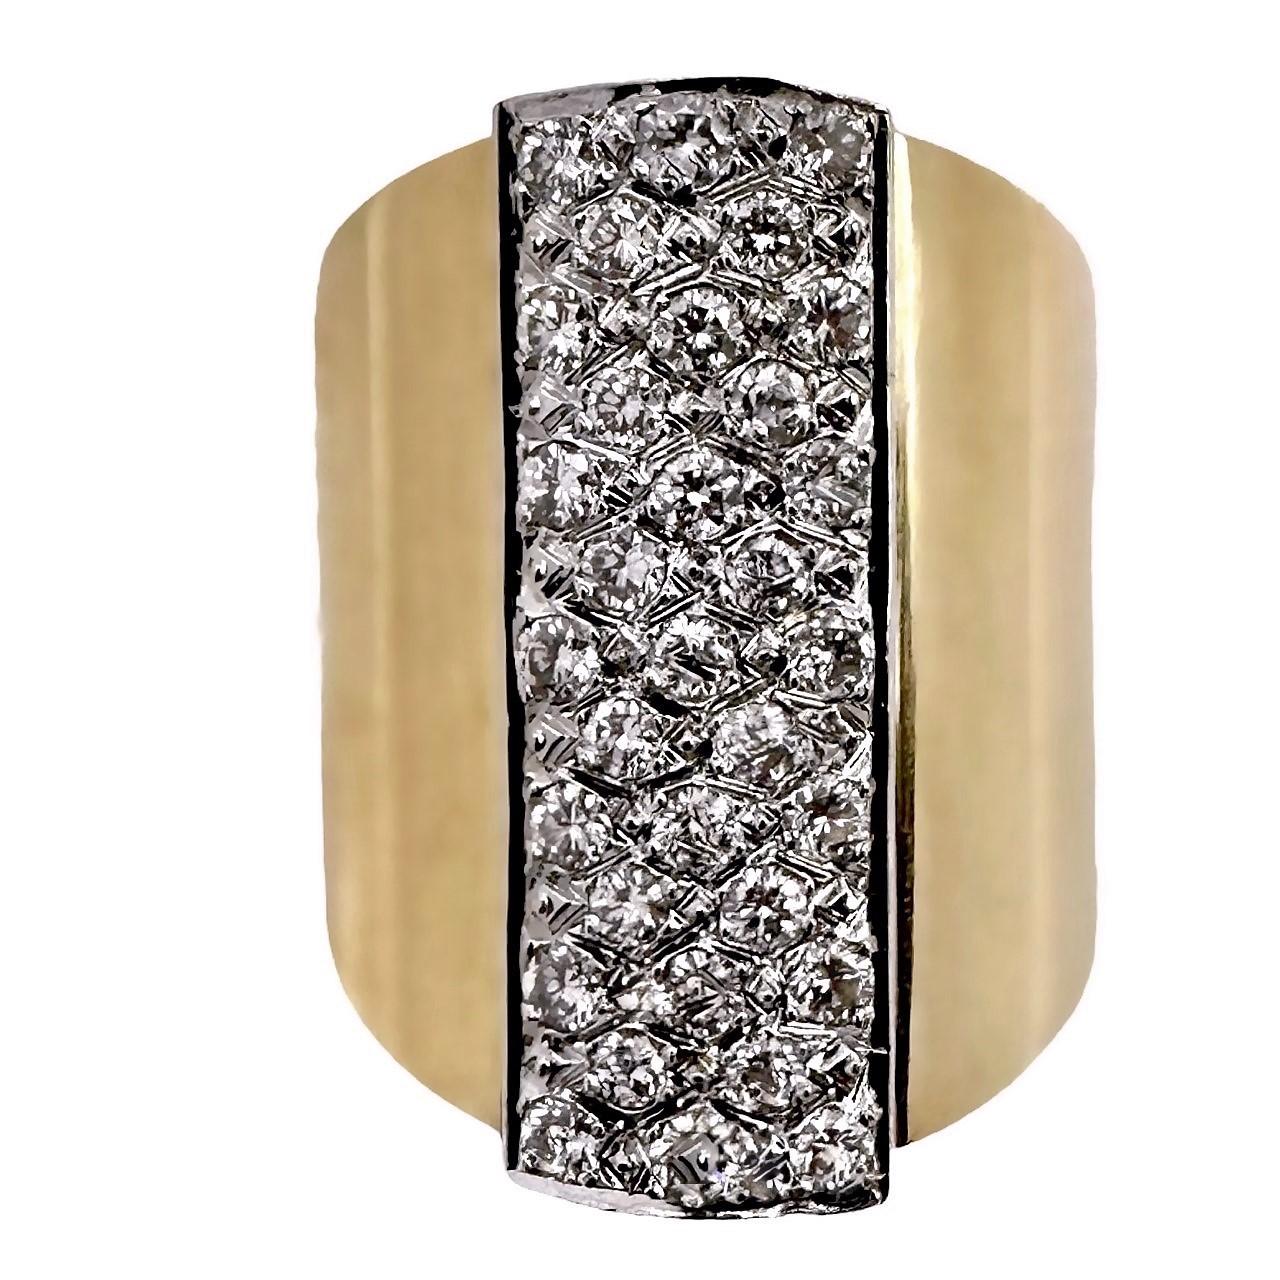 This is a sleek, fashionable ring measuring one inch long on the finger, making it quite the statement piece. The smooth lines of the ring are accented by a 1 inch by 1/3 of an inch rectangular strip running down the center.  It is pave' set with 5